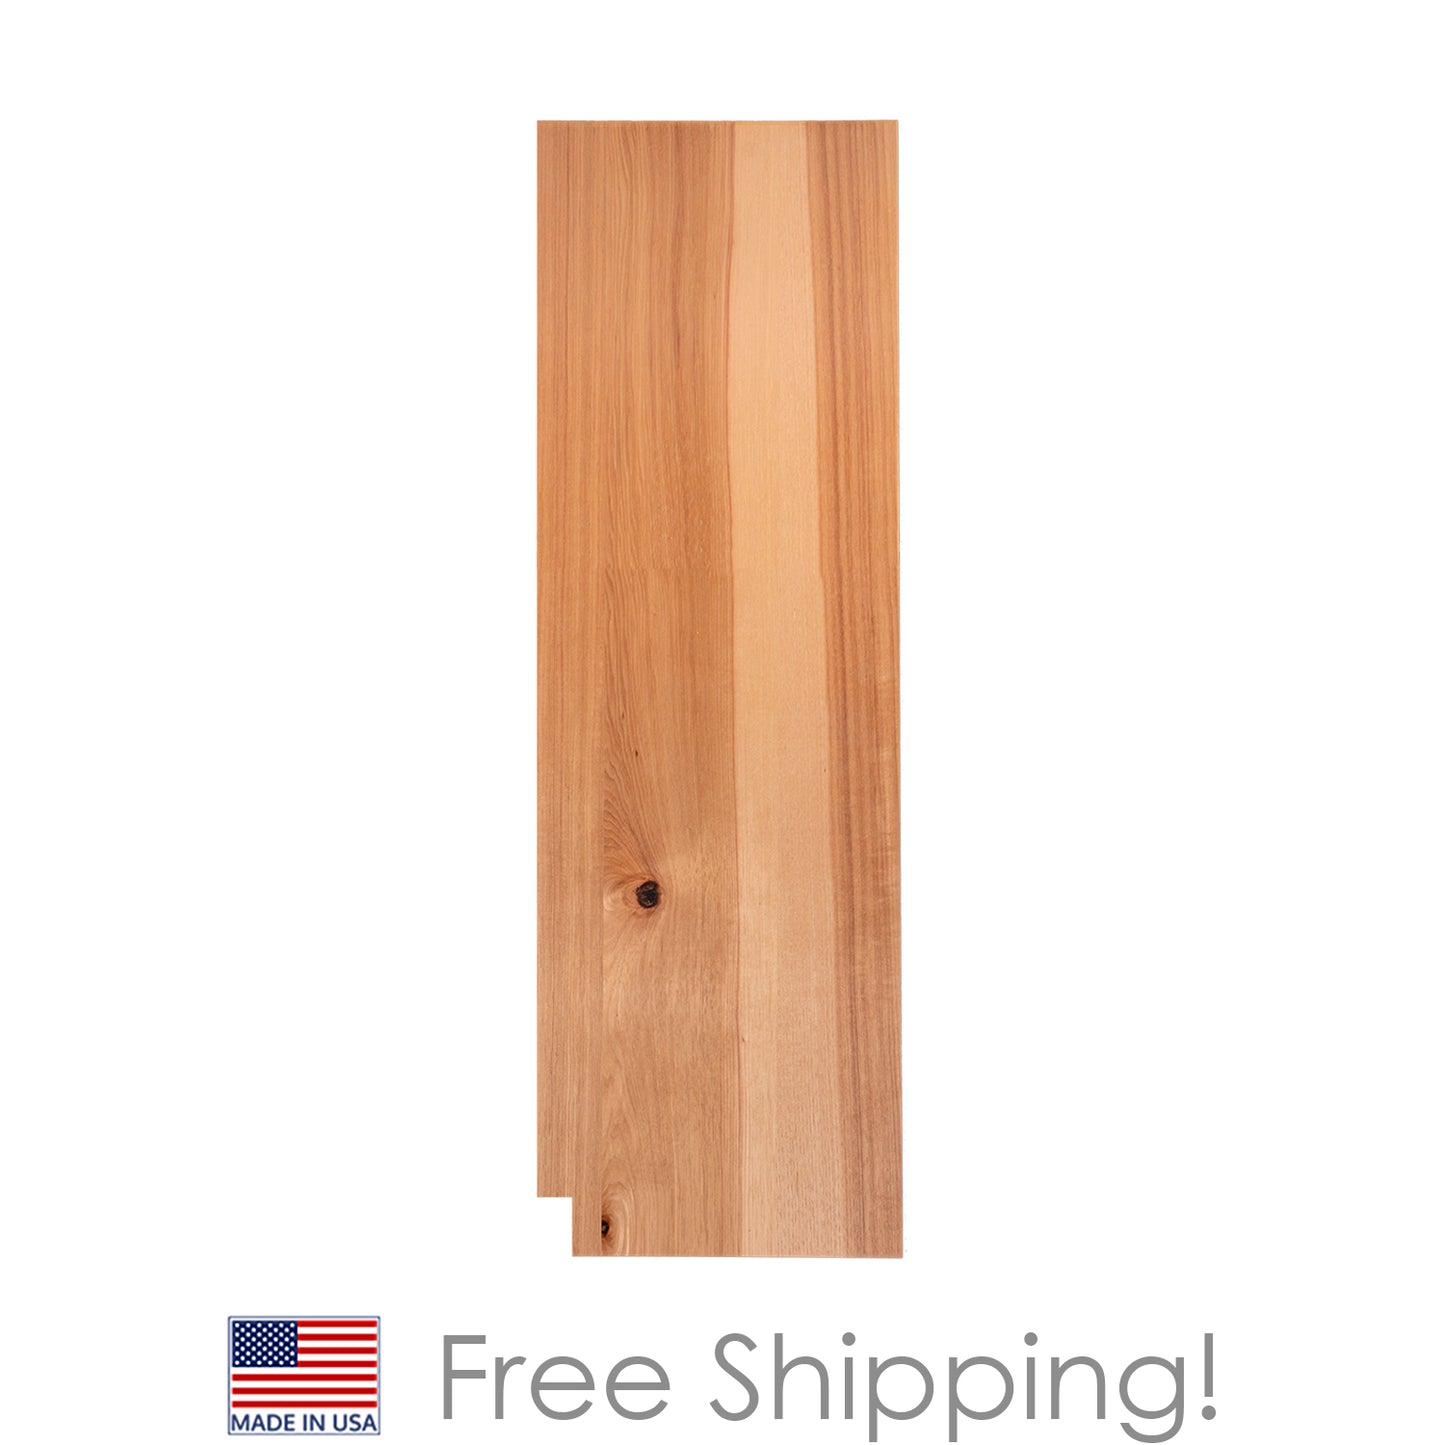 Quicklock RTA (Ready-to-Assemble) Raw Hickory .25"X23.25"X84" Right End Panel